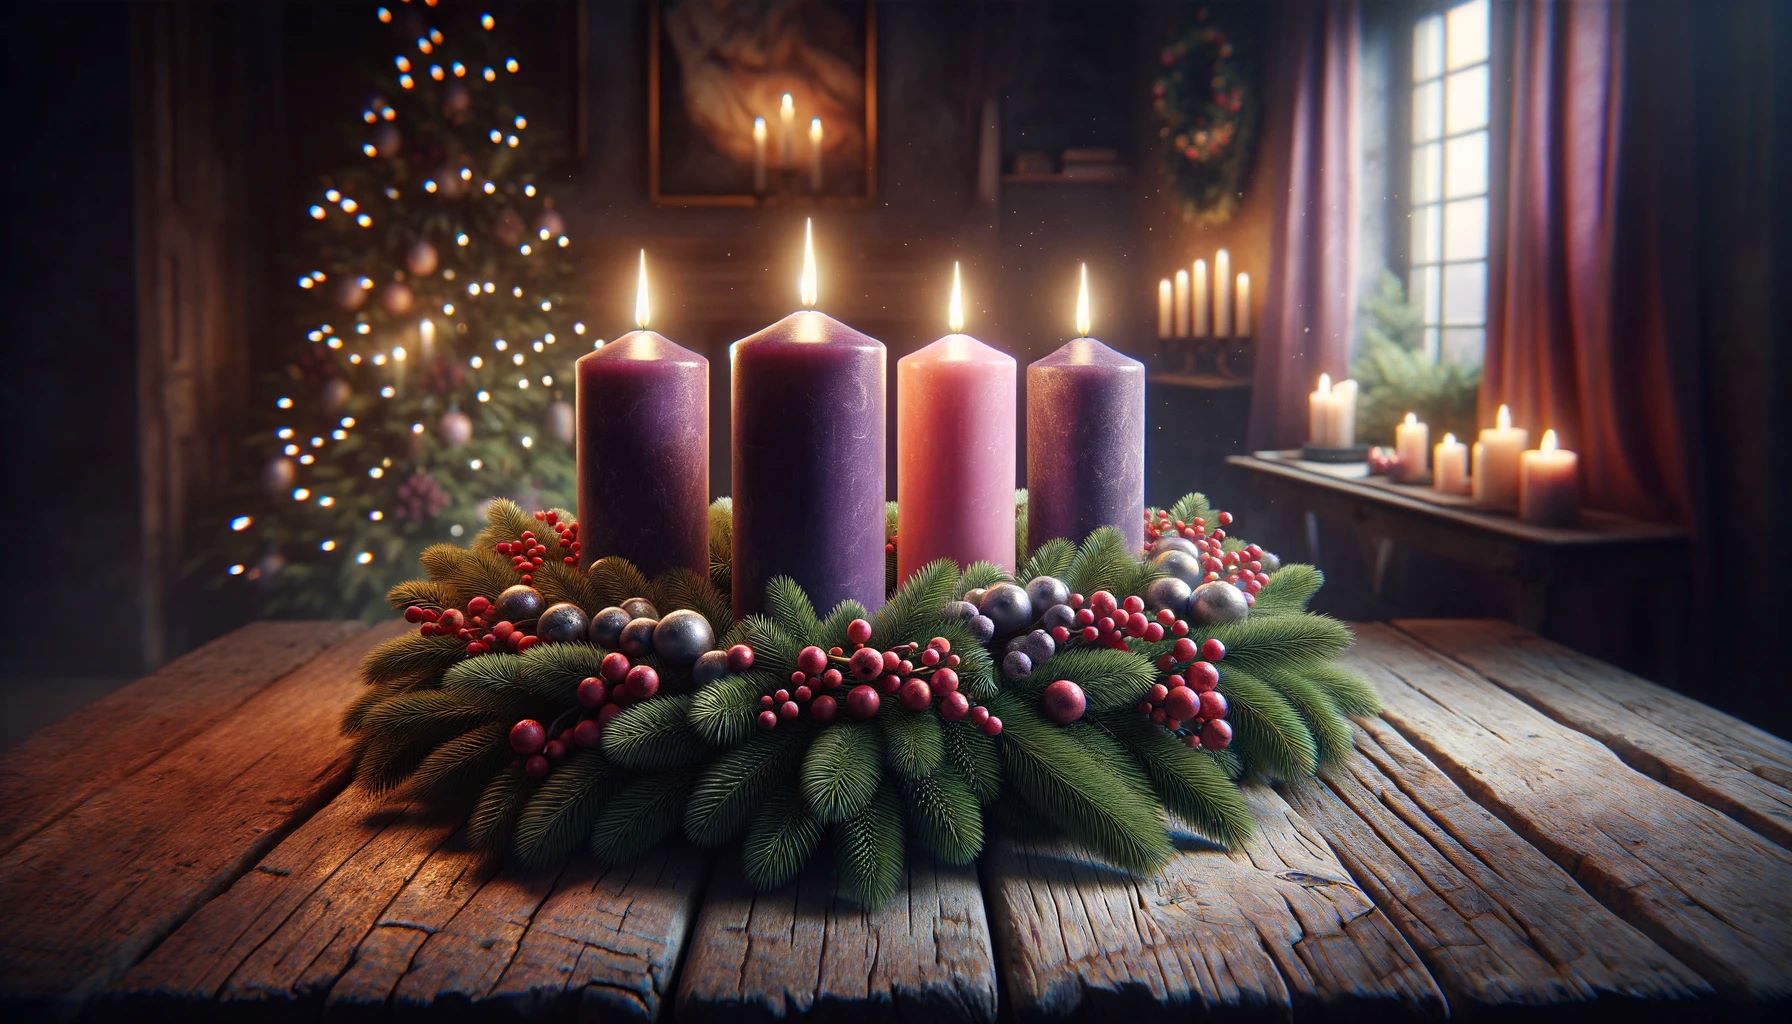 What Is An Advent Candle?